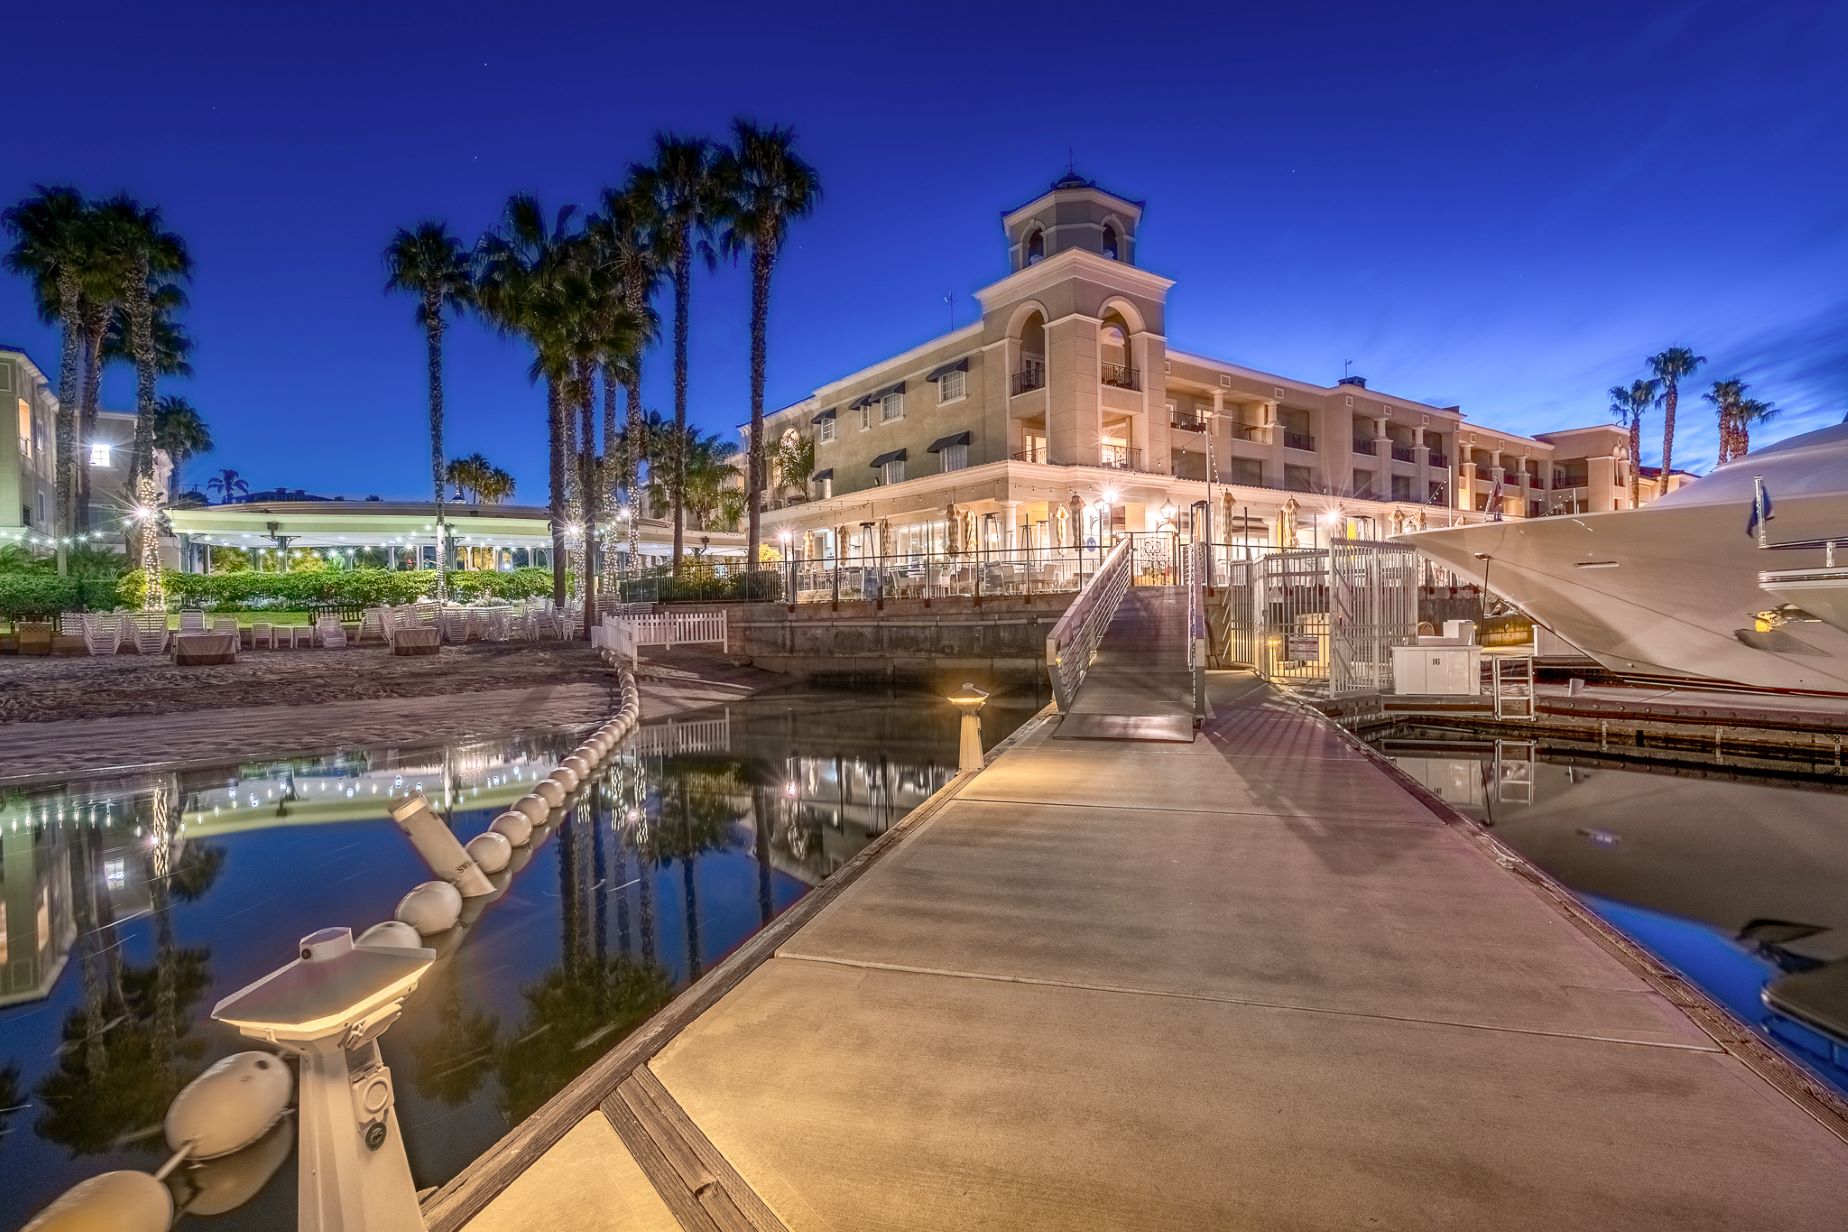 AN image of the harbor and exterior of Balboa Bay Resort.